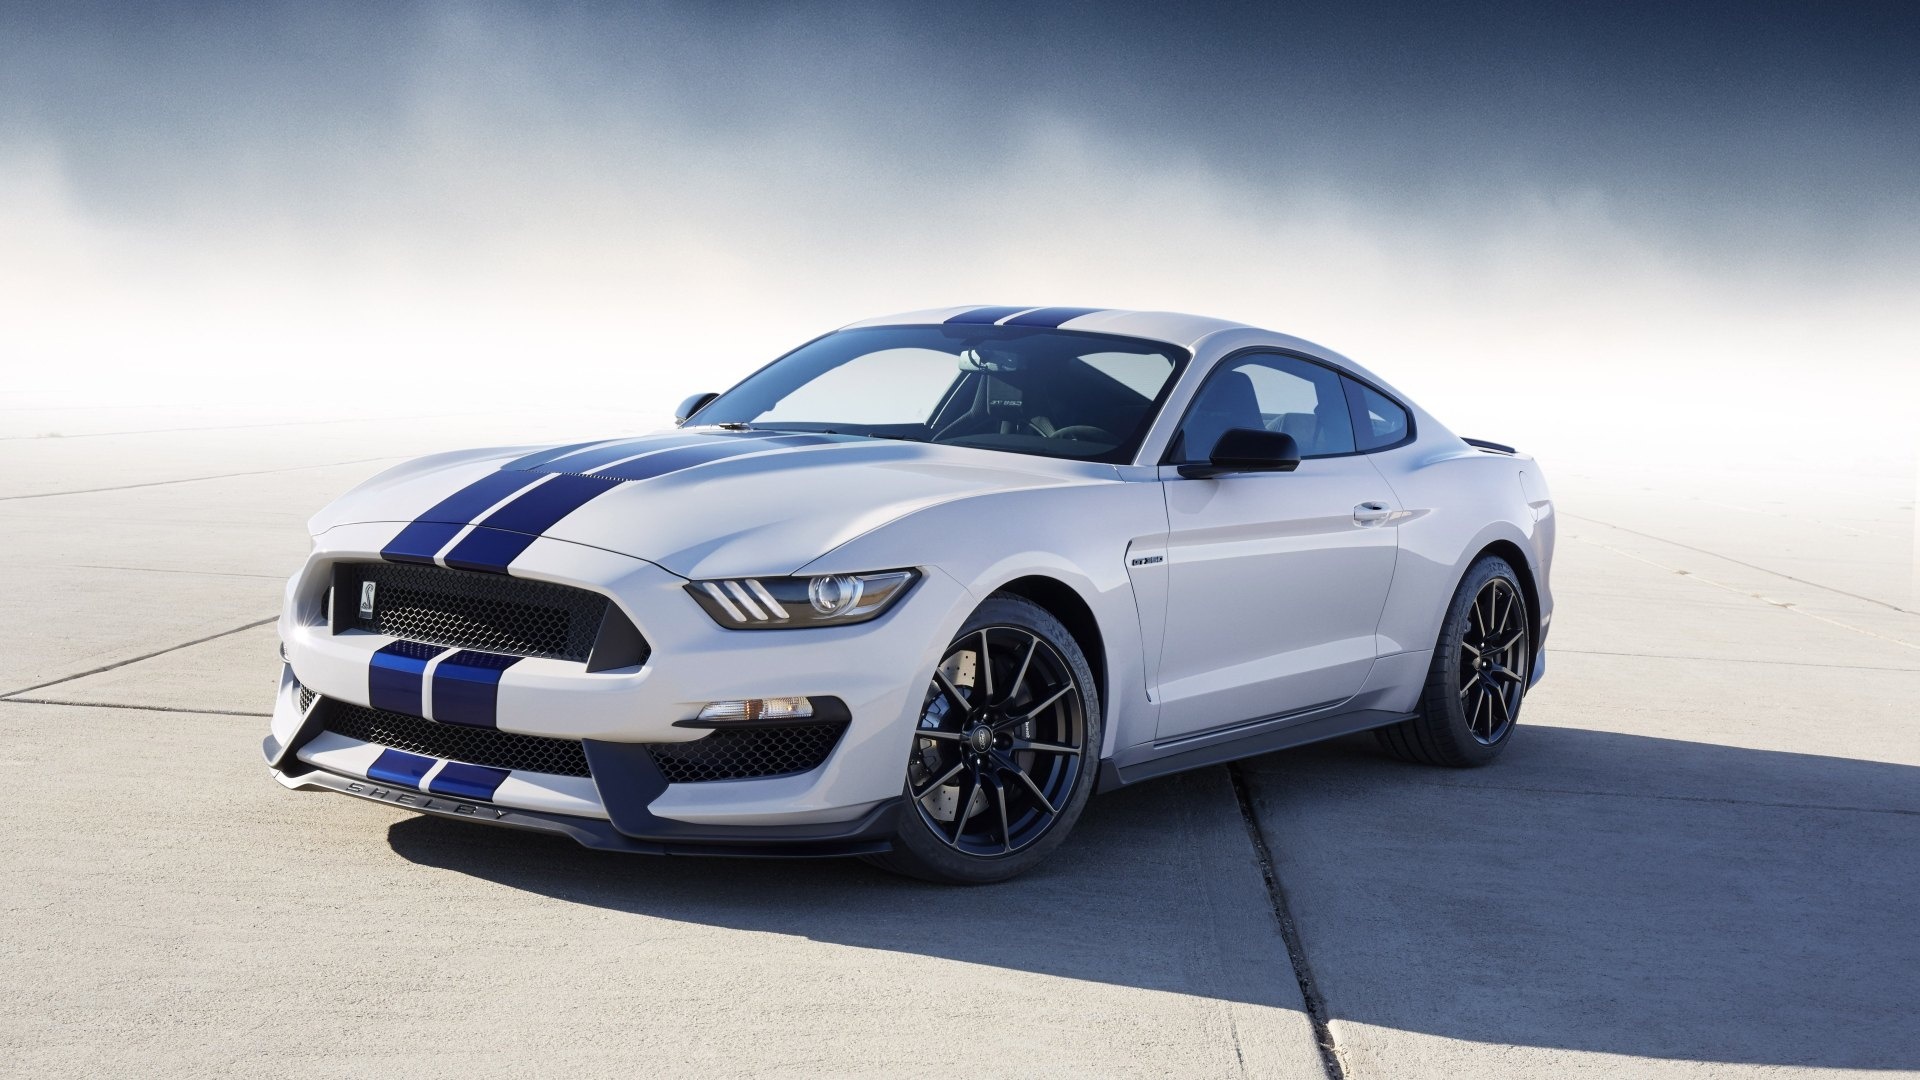 Ford Mustang Shelby Gt350 1920x1080